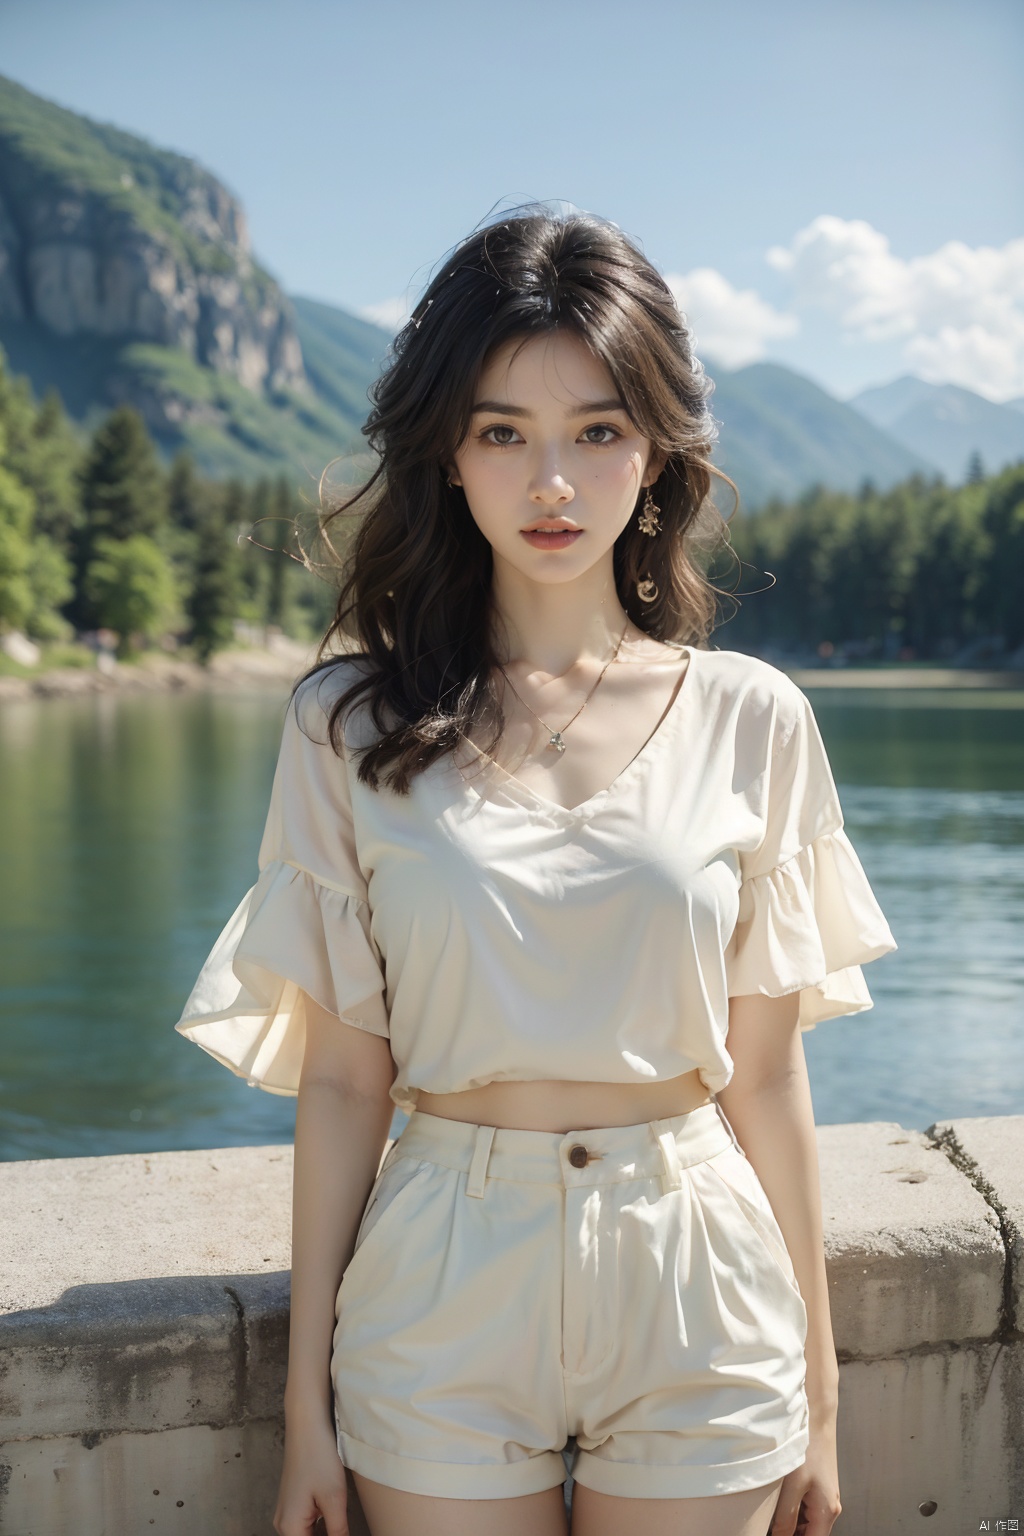  (Best quality, High resolution, Masterpiece :1.3), A pretty woman with slim figure, Breasts, (Dark brown layered haircut), Wearing pendant, T-shirt, White shorts, Outdoor, Great view, Lake and mountains in distant background, Details exquisitely rendered in the face and skin texture, Detailed eyes, Double eyelid, (/qingning/), jiqing, babata, mtianmei, (\MBTI\)